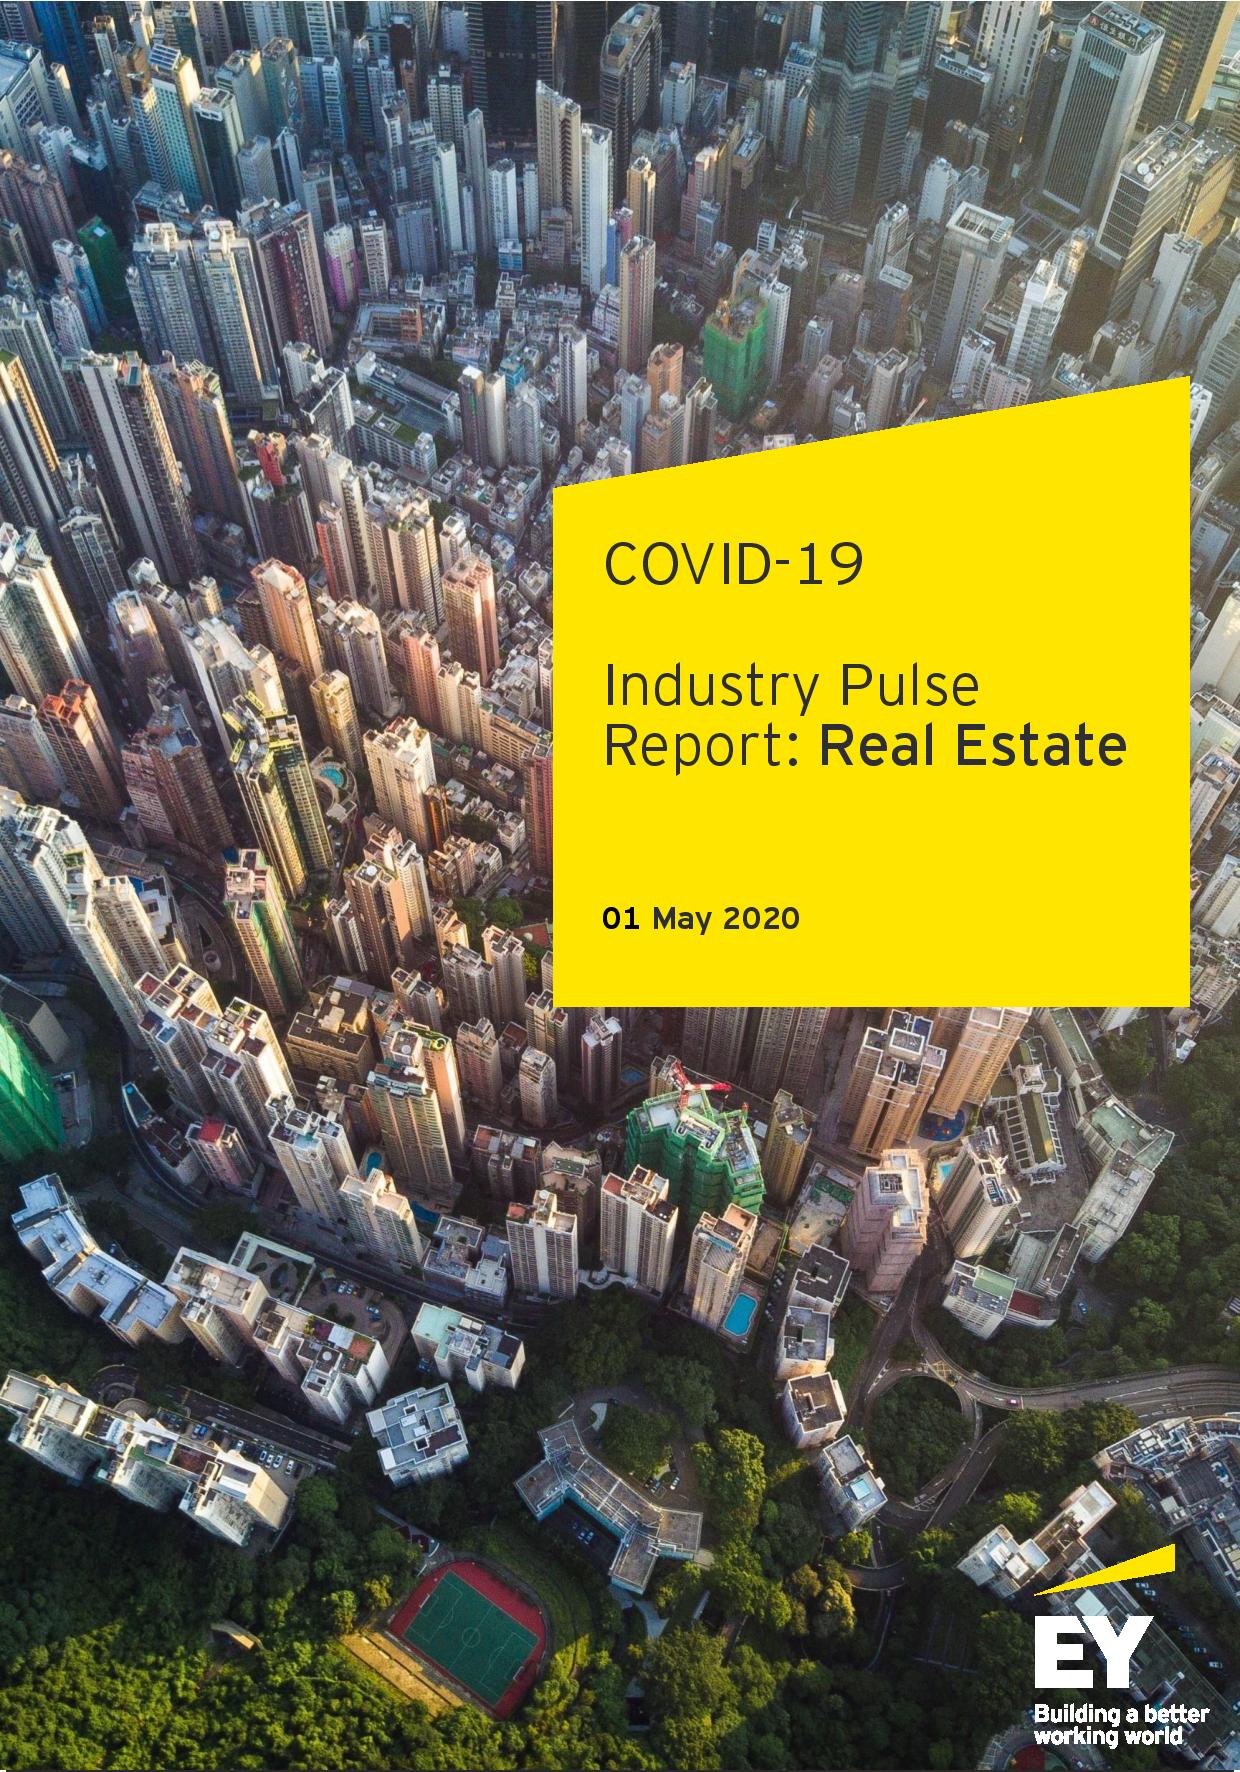 EY Cyprus: COVID-19 Industry Pulse Report: Real Estate